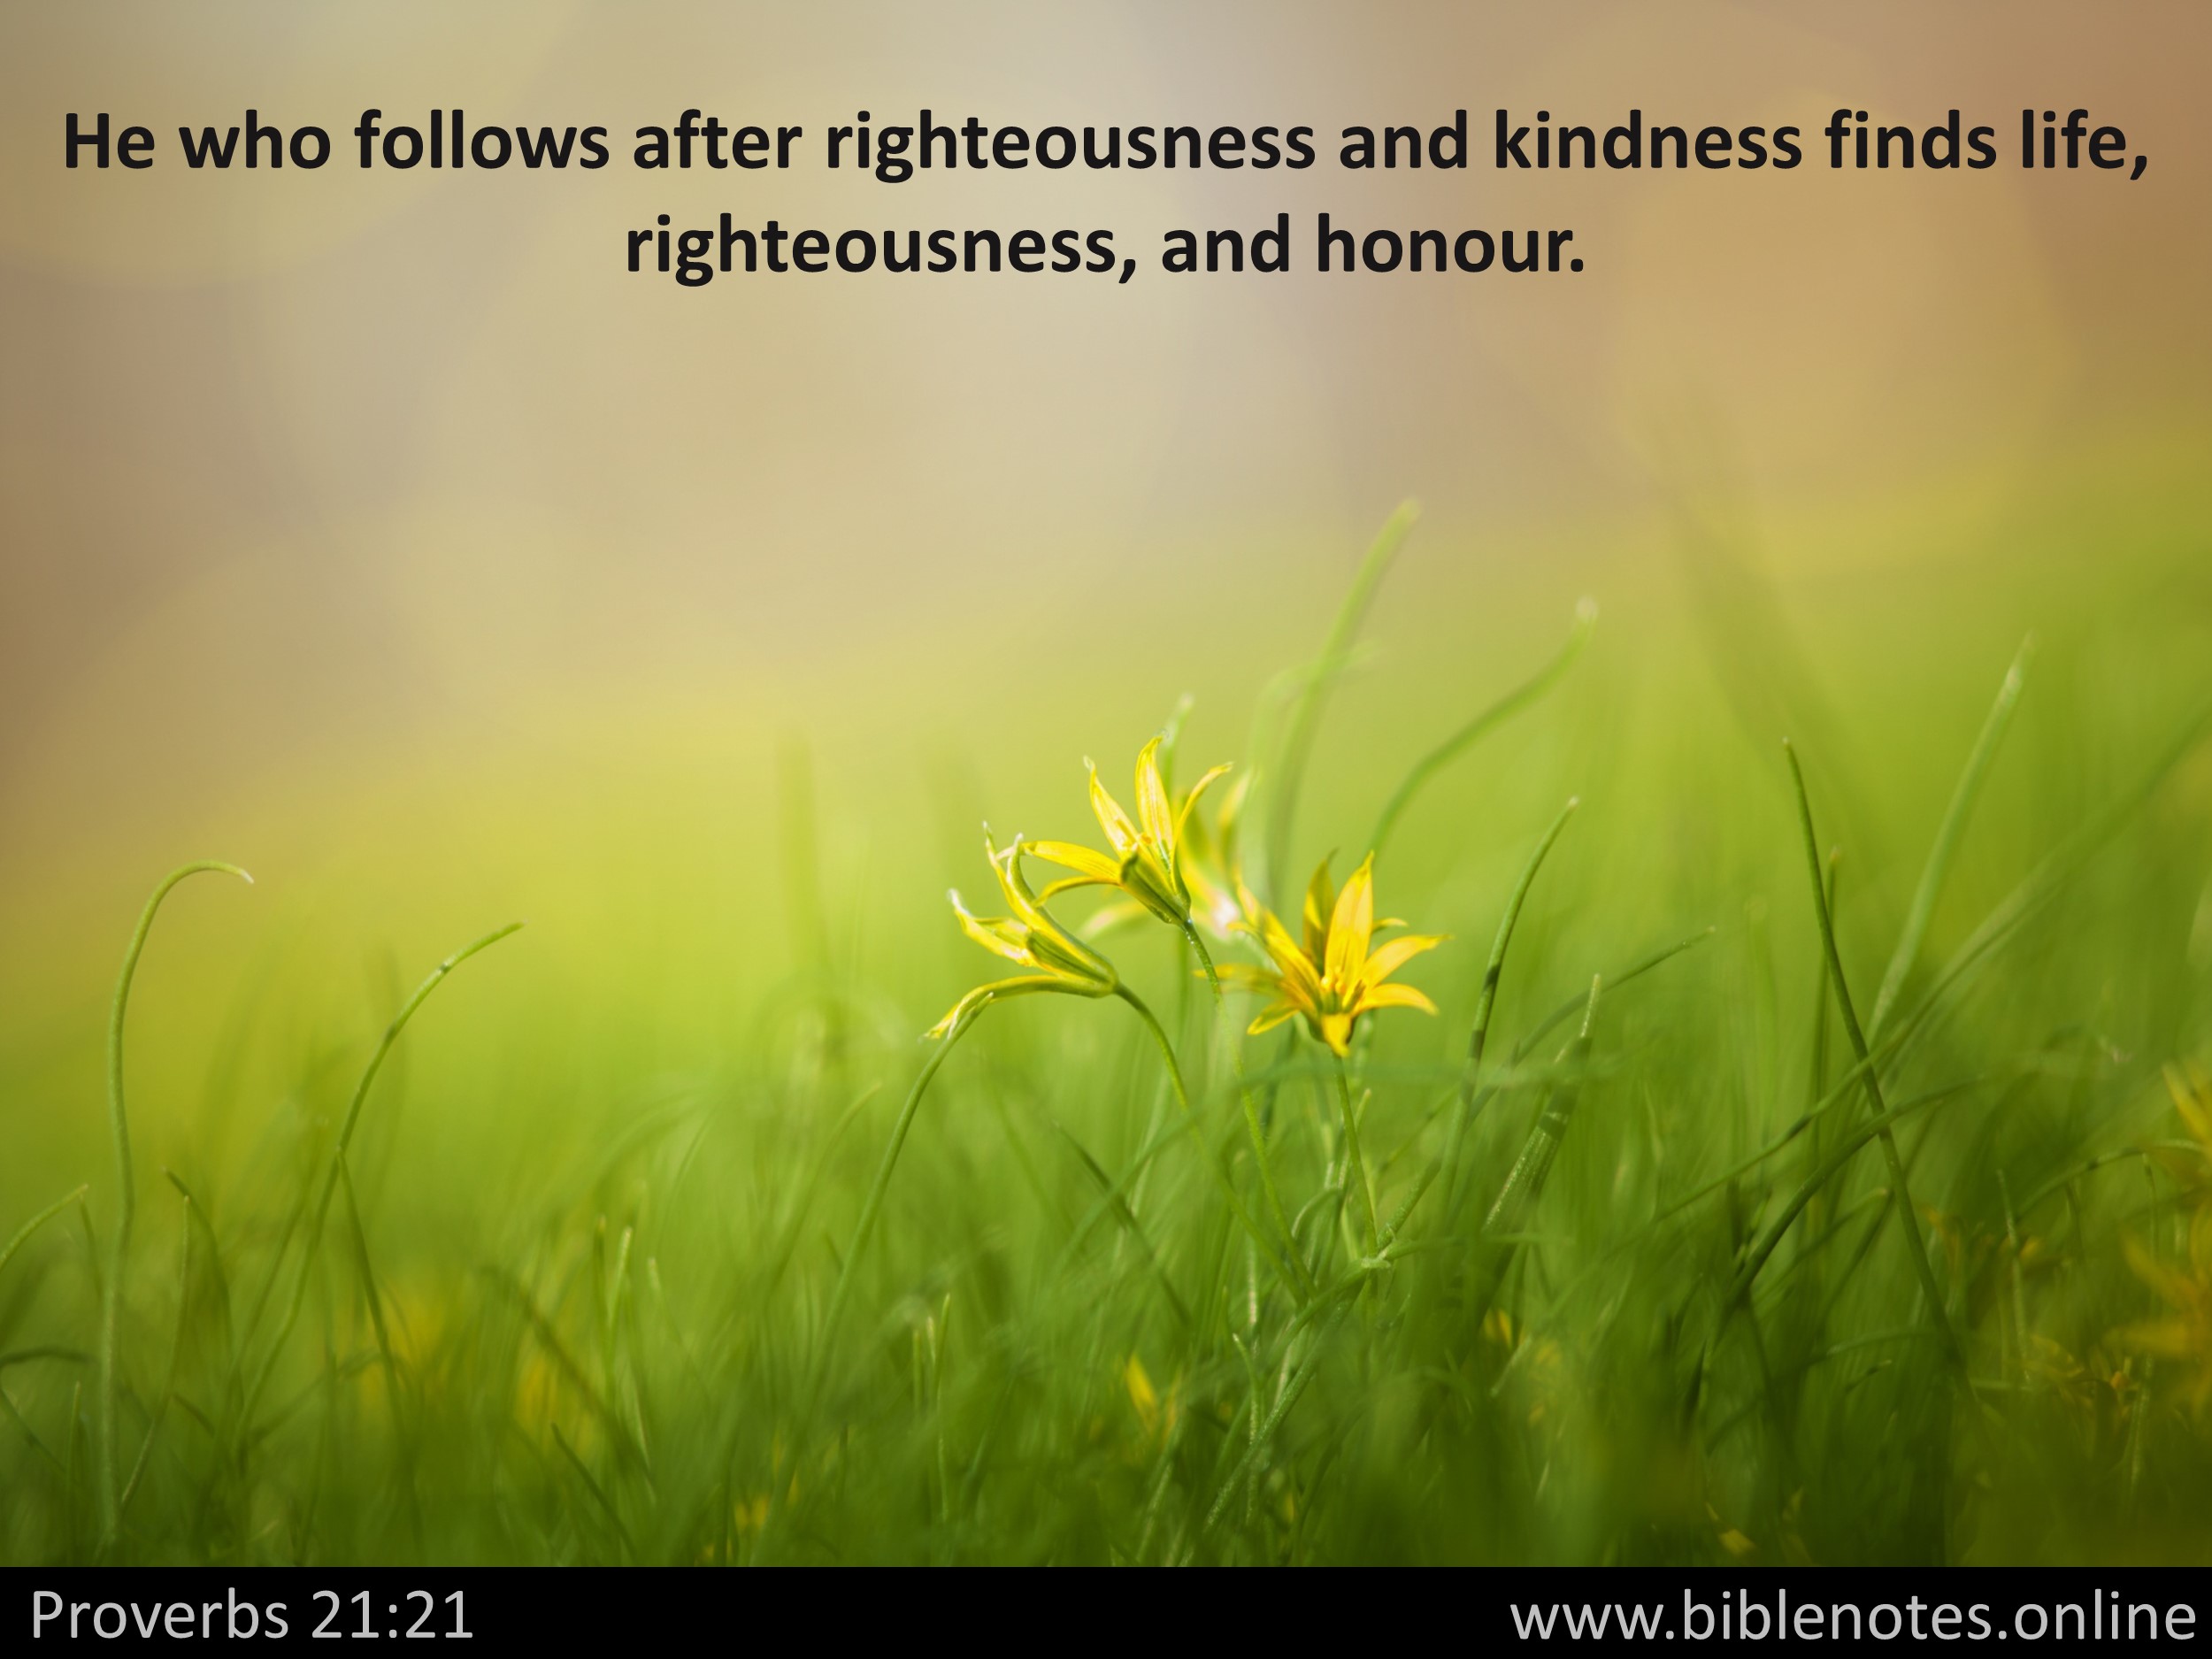 Bible Verse from Proverbs Chapter 21